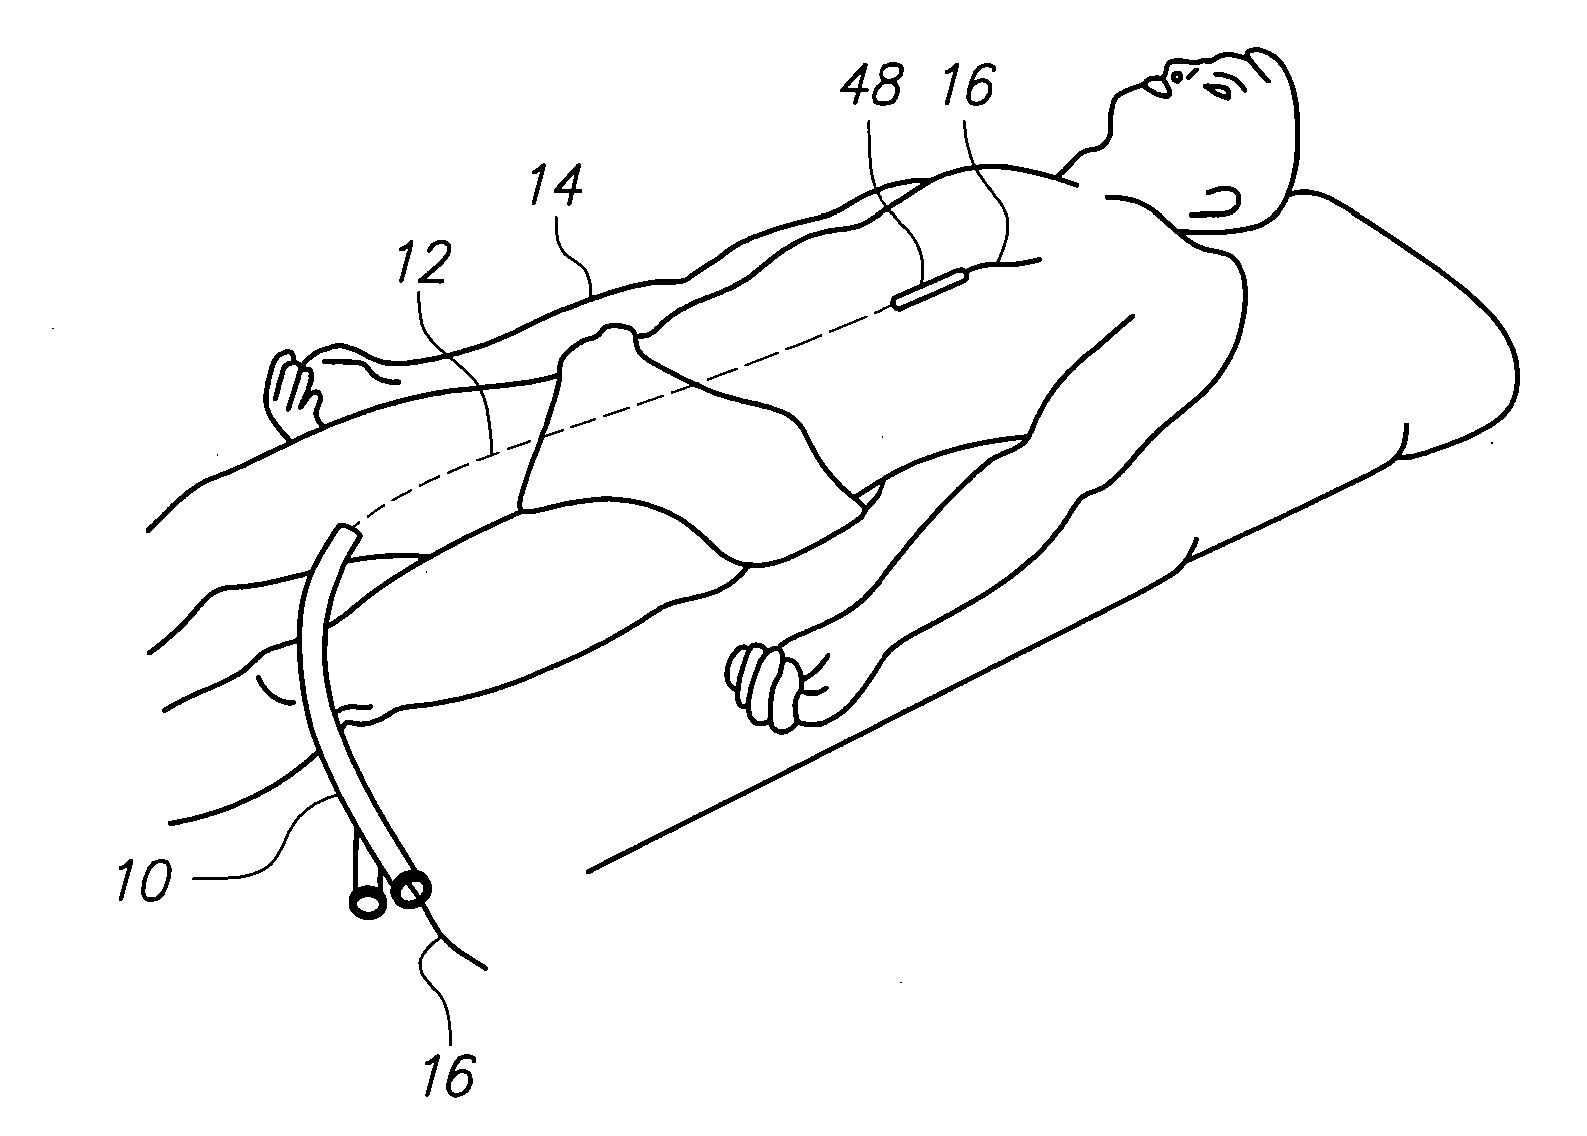 Over-the-wire catheter with lateral access